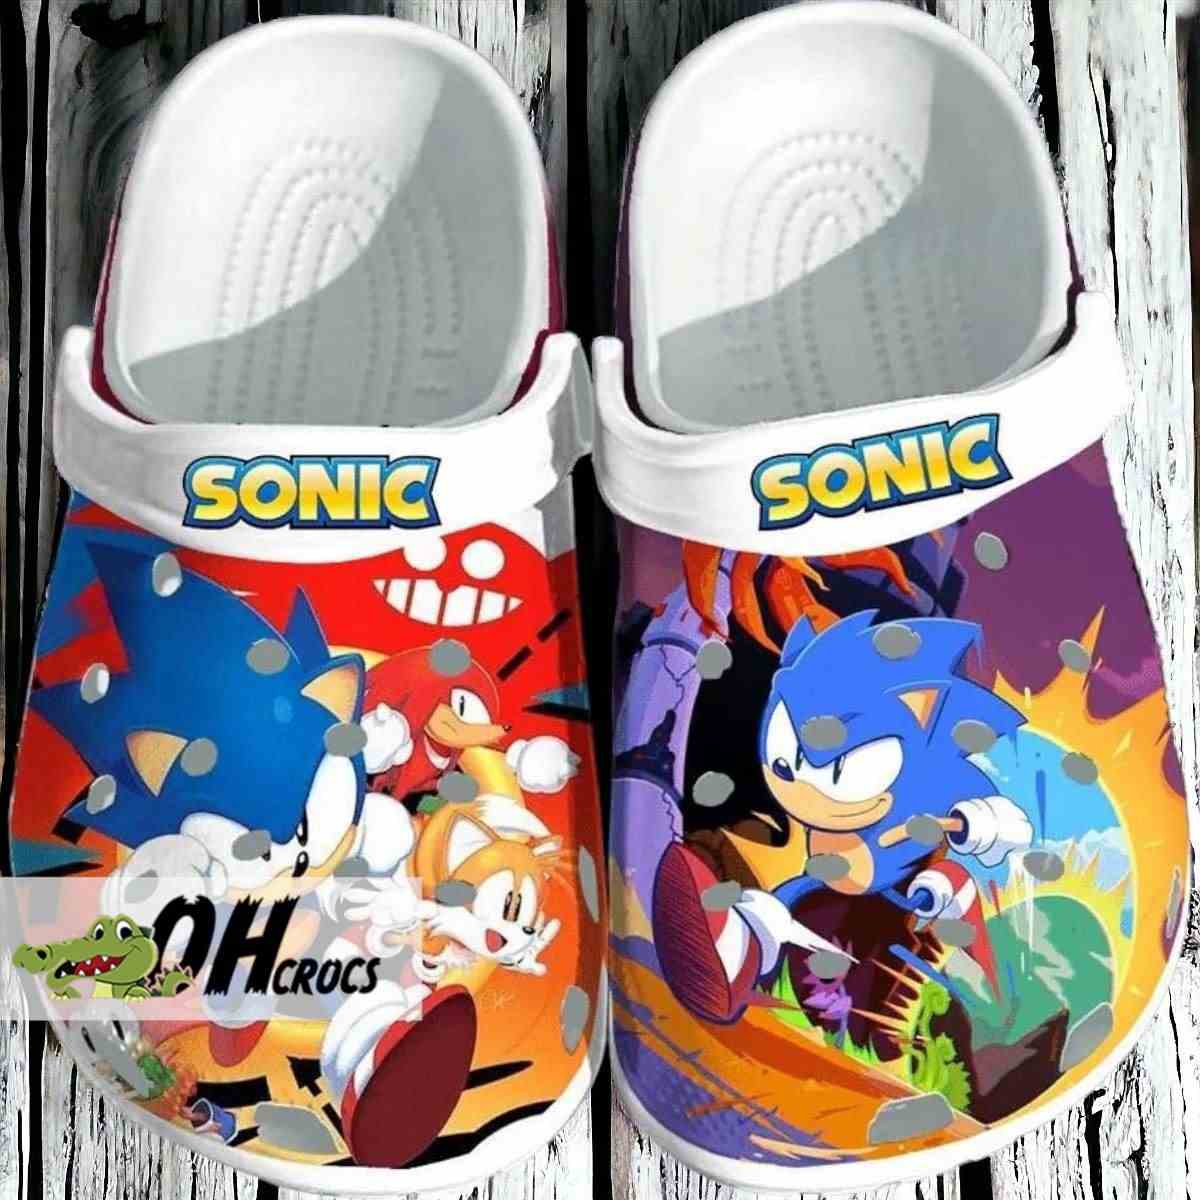 Sonic Knuckles Tails Crocs Gift